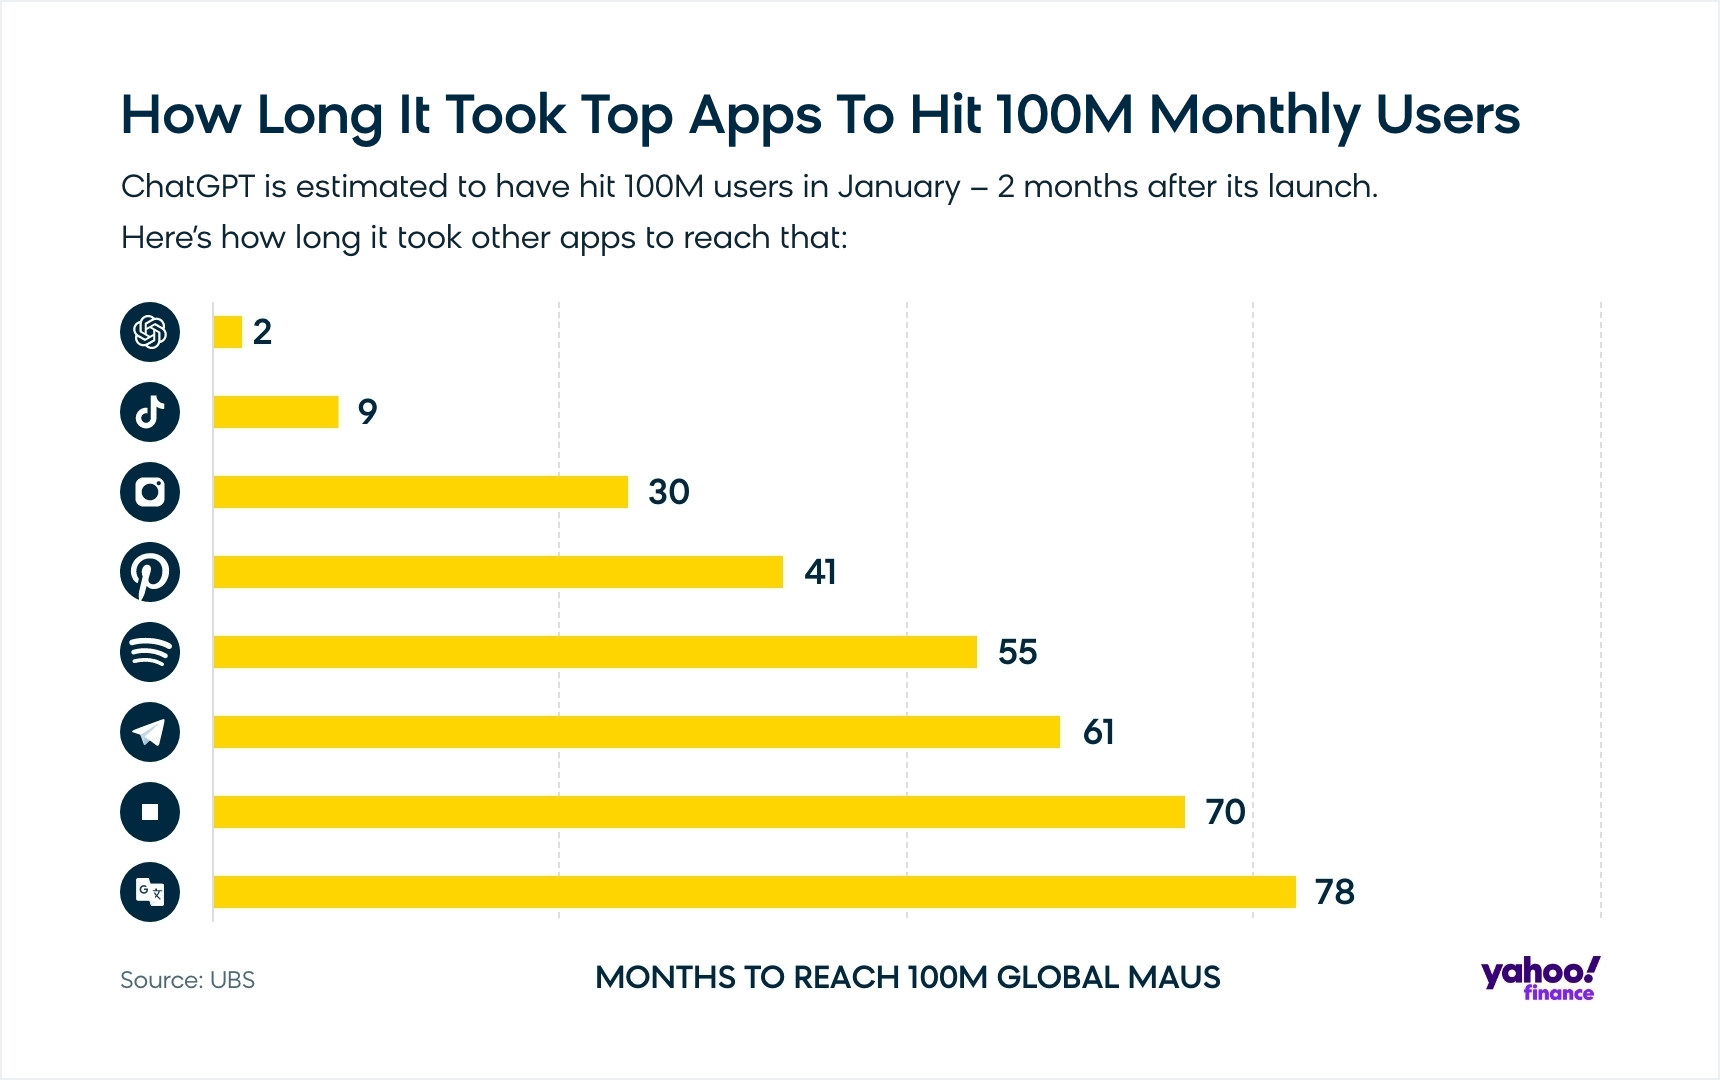 Chart showing time for top apps to reach 100M monthly users